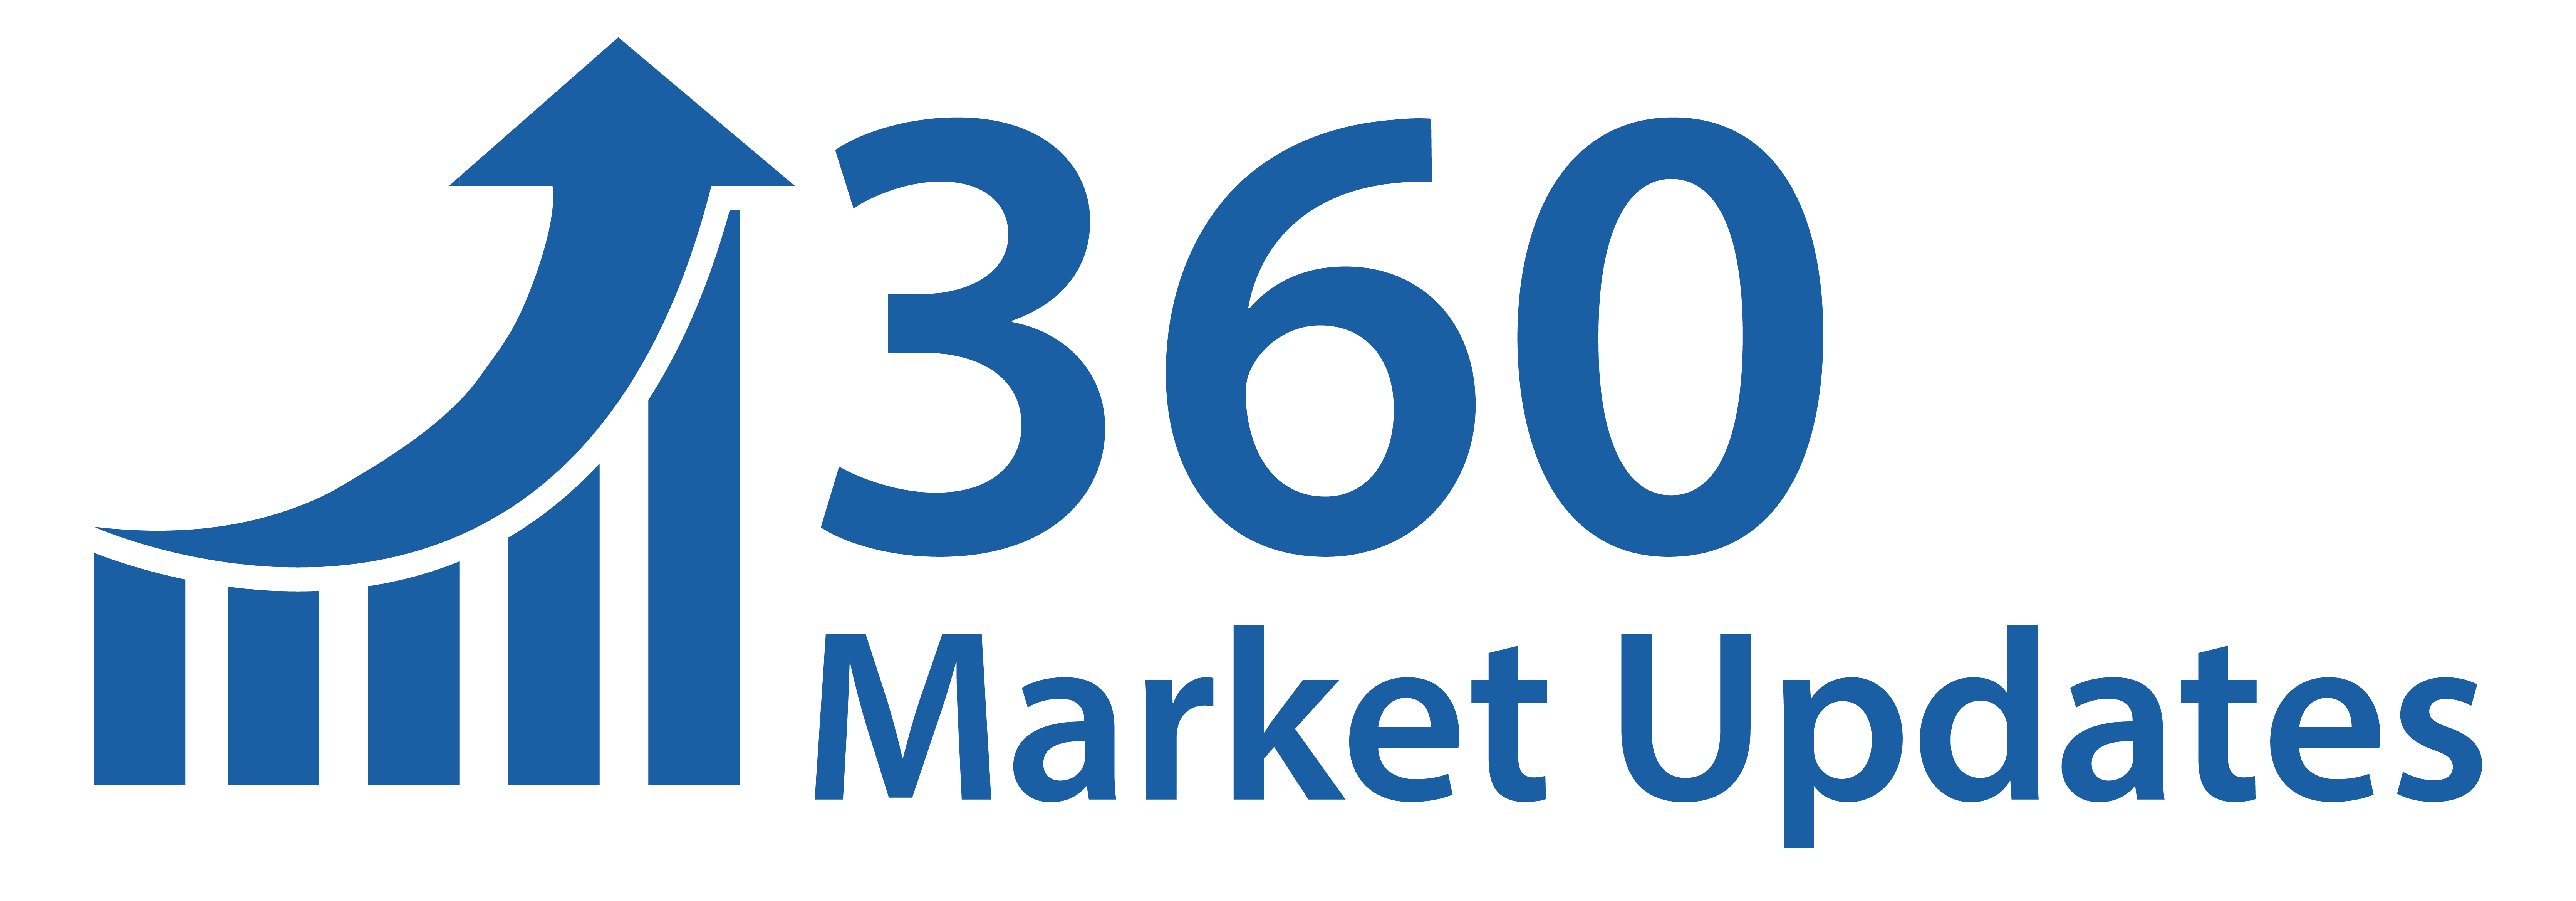 Urea Market 2019| Worldwide Overview by Industry Size, Market Share, Future Trends, Growth Factors and Leading Players Research Report Analysis by 360 Market Updates